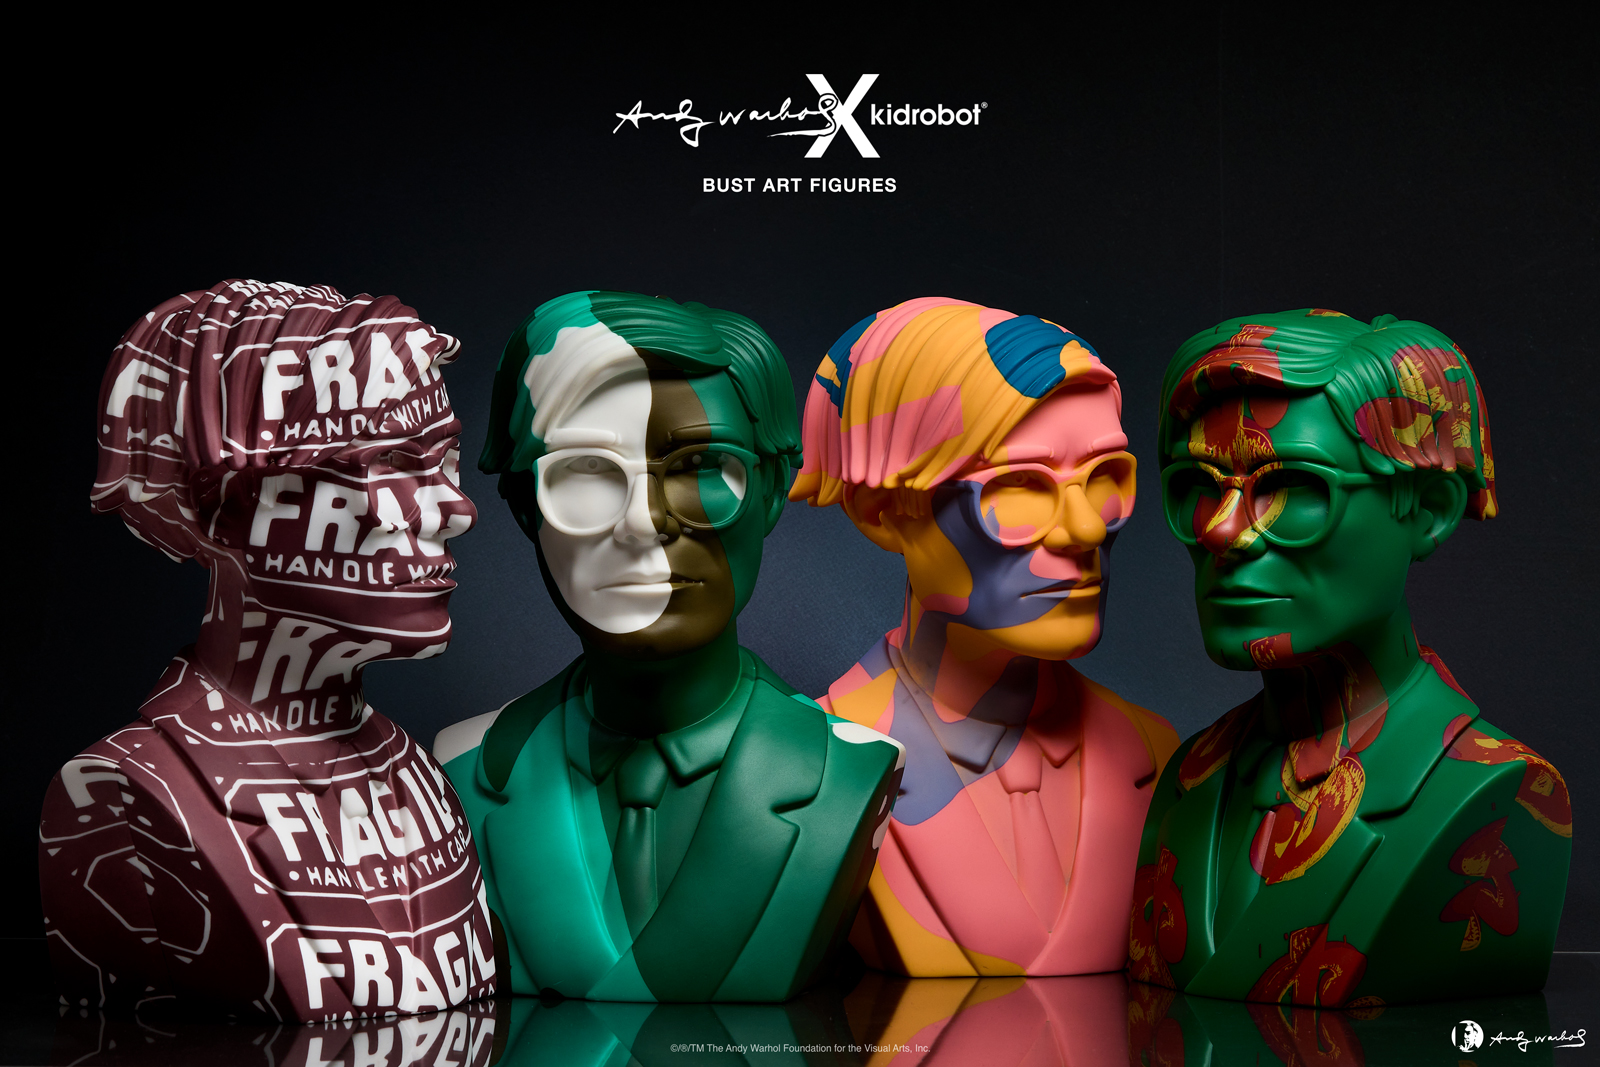 First look at the series of Andy Warhol The Bust Vinyl Art Sculptures dropping throughout 2022.